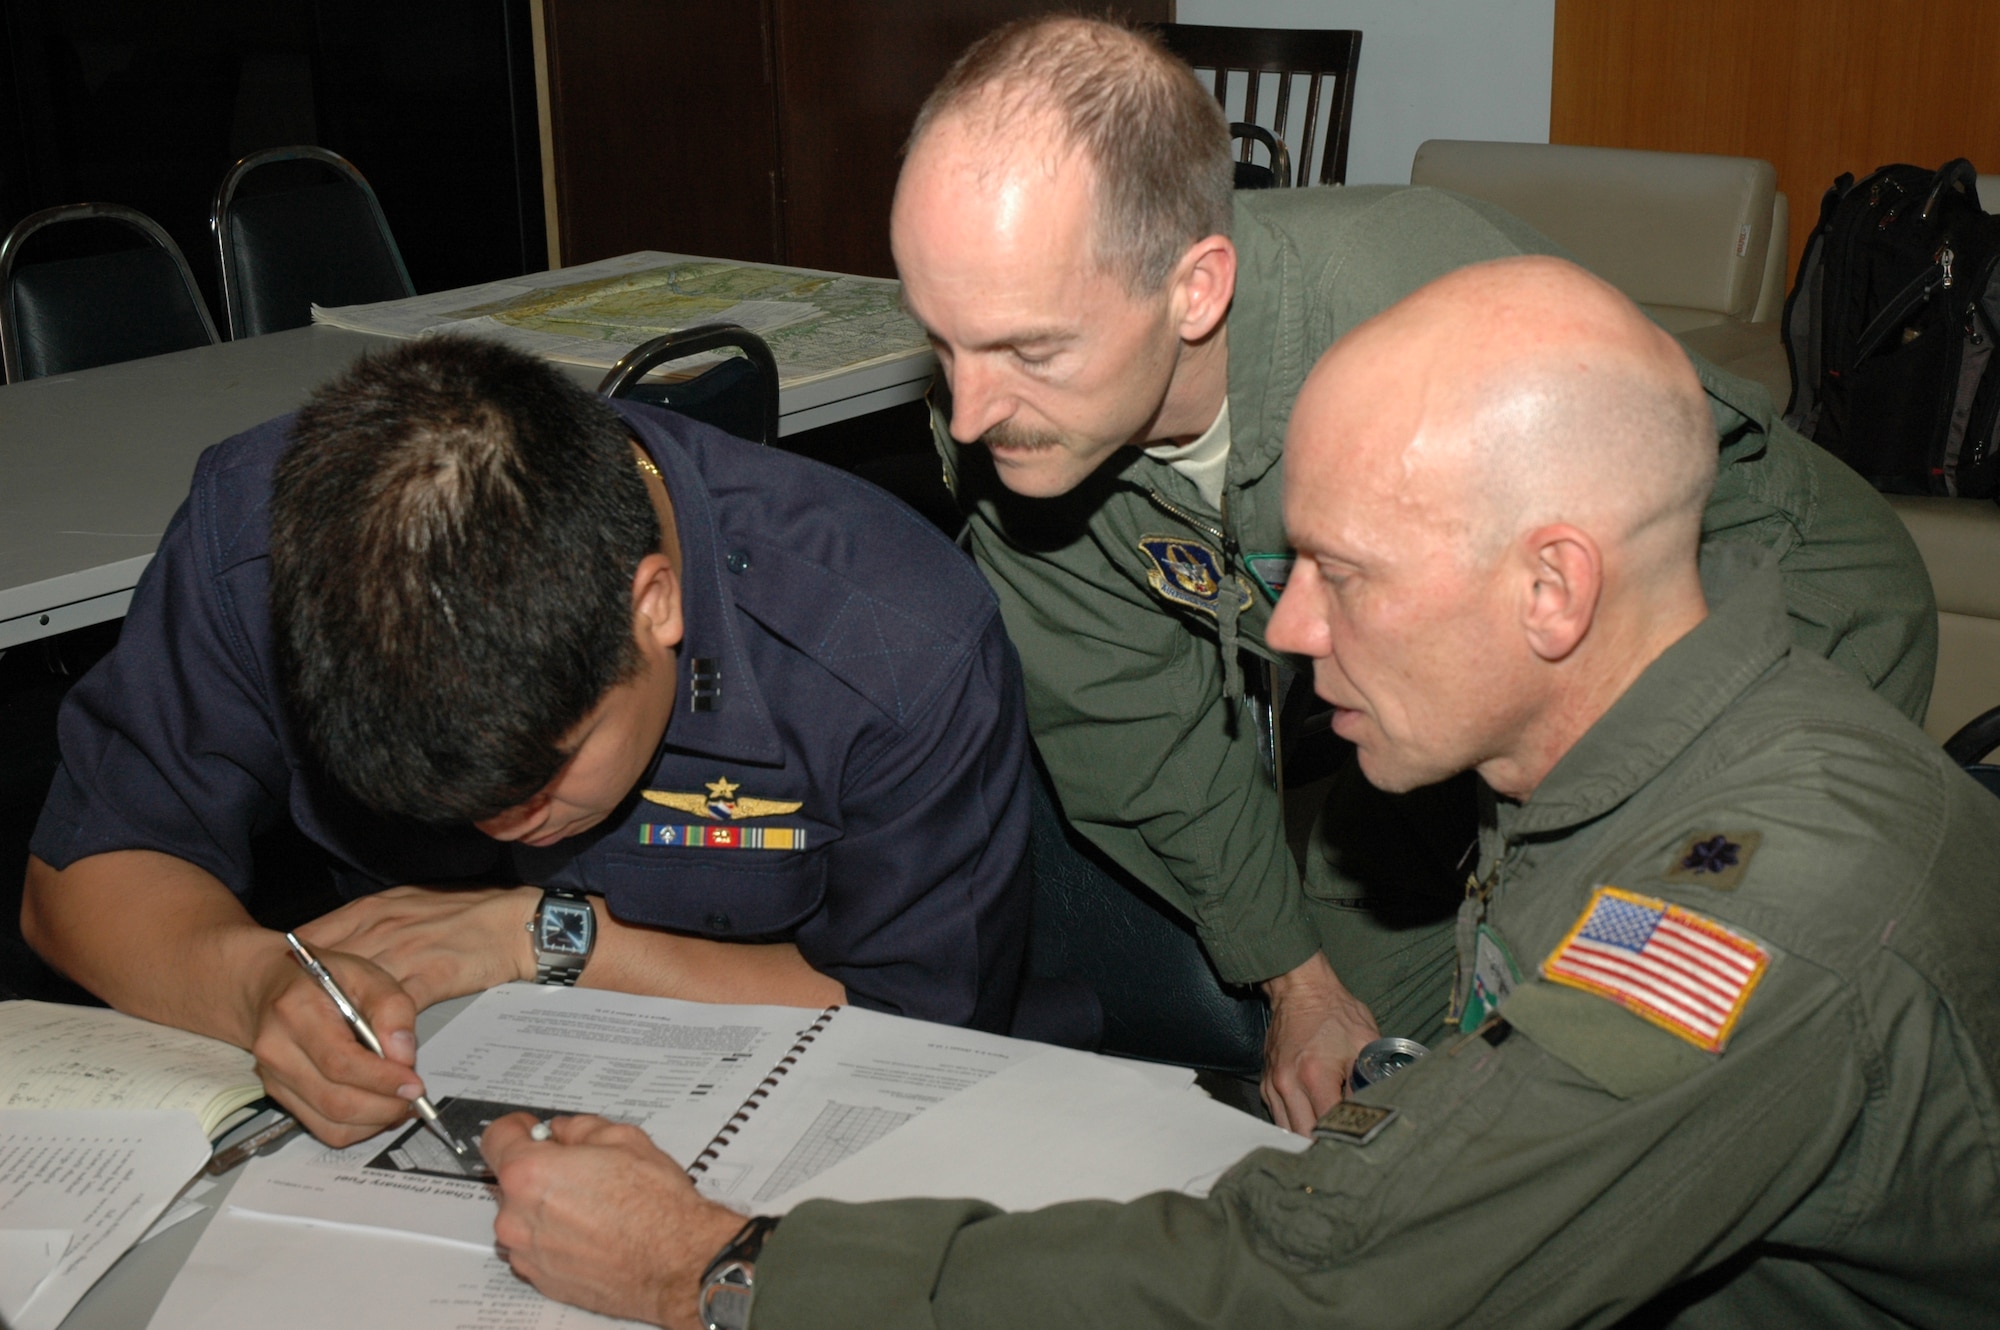 Senior Master Sgt. Kenneth E. Kunkle, flight engineer, and Lt. Col. James M. Steward, chief of flying safety, both with the 302nd Airlift Wing based at Peterson AFB, Colo., assist a Royal Thai Air Force counterpart in checking the wing stress levels in the C-130 flight manual.  Seven members of the 302 AW traveled to Thailand to provide expert training to RTAF members on safe and effective Modular Airborne Firefighting System operations.  This event marks the first time the Air Force Reserve has sent delegates to train a foreign Air Force on use of the MAFFS equipment. (U.S. Air Force photo/Capt. Jody L. Ritchie)